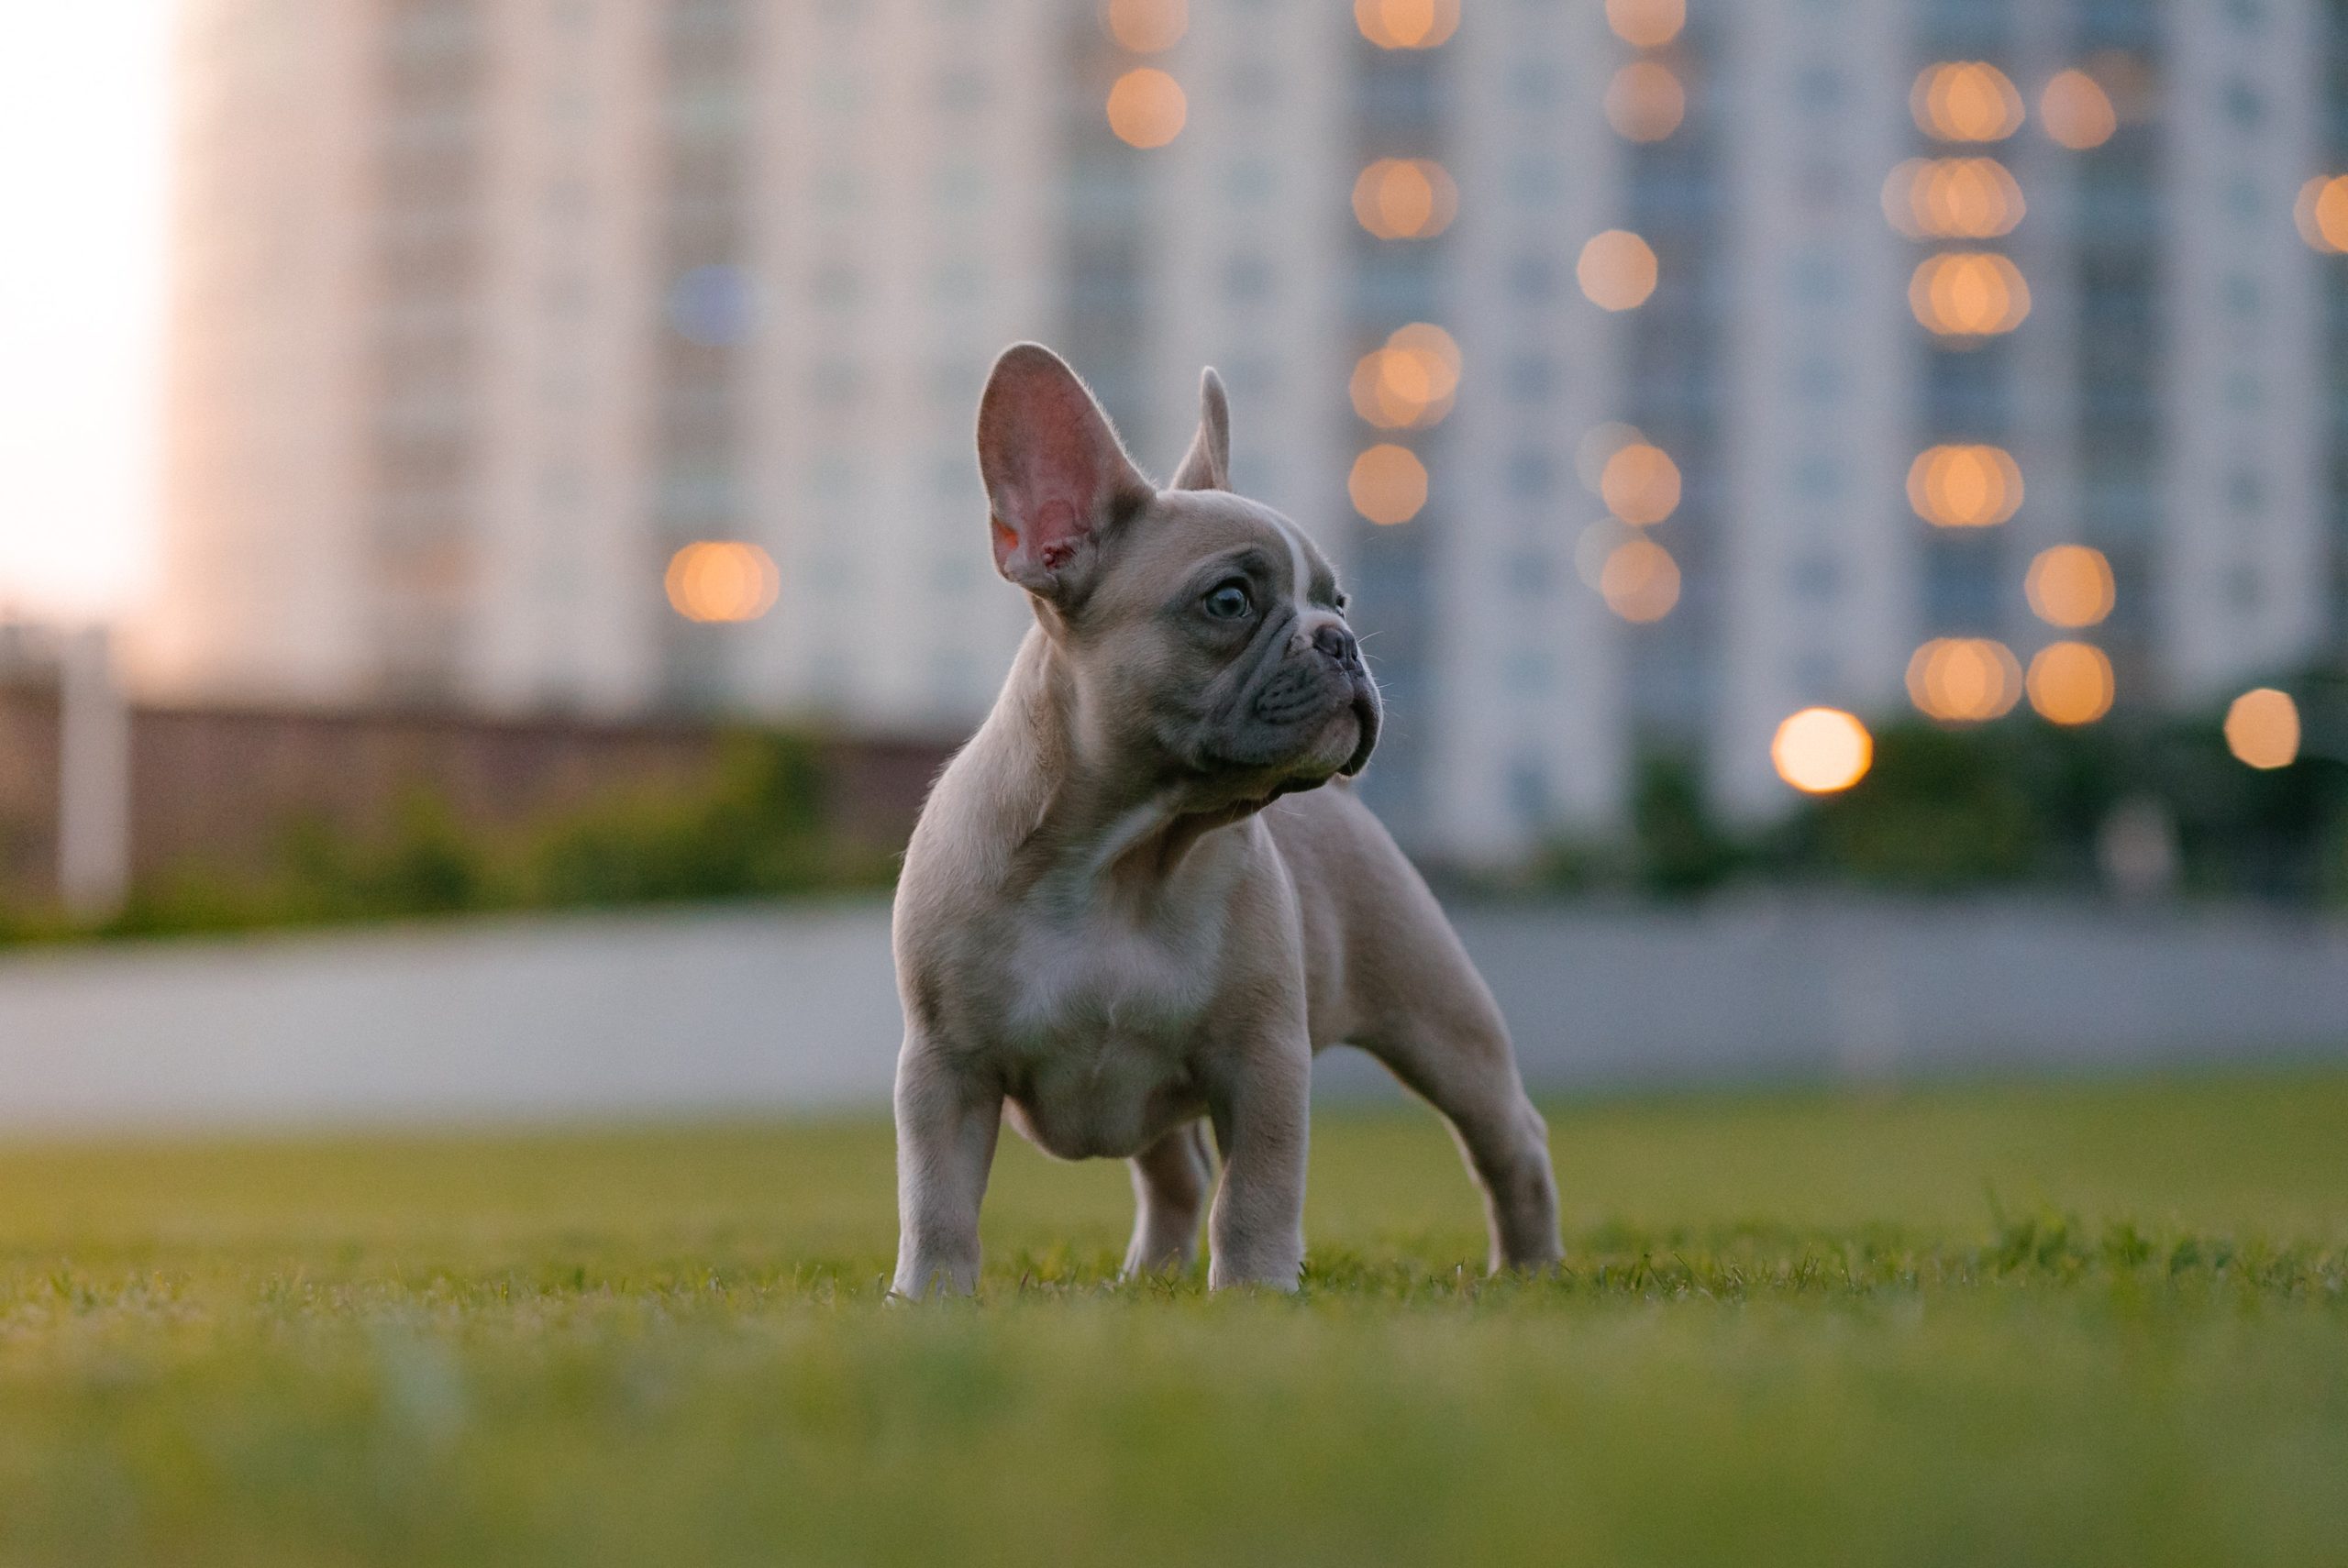 A small dog stands in a grassy area with a city scape behind it.